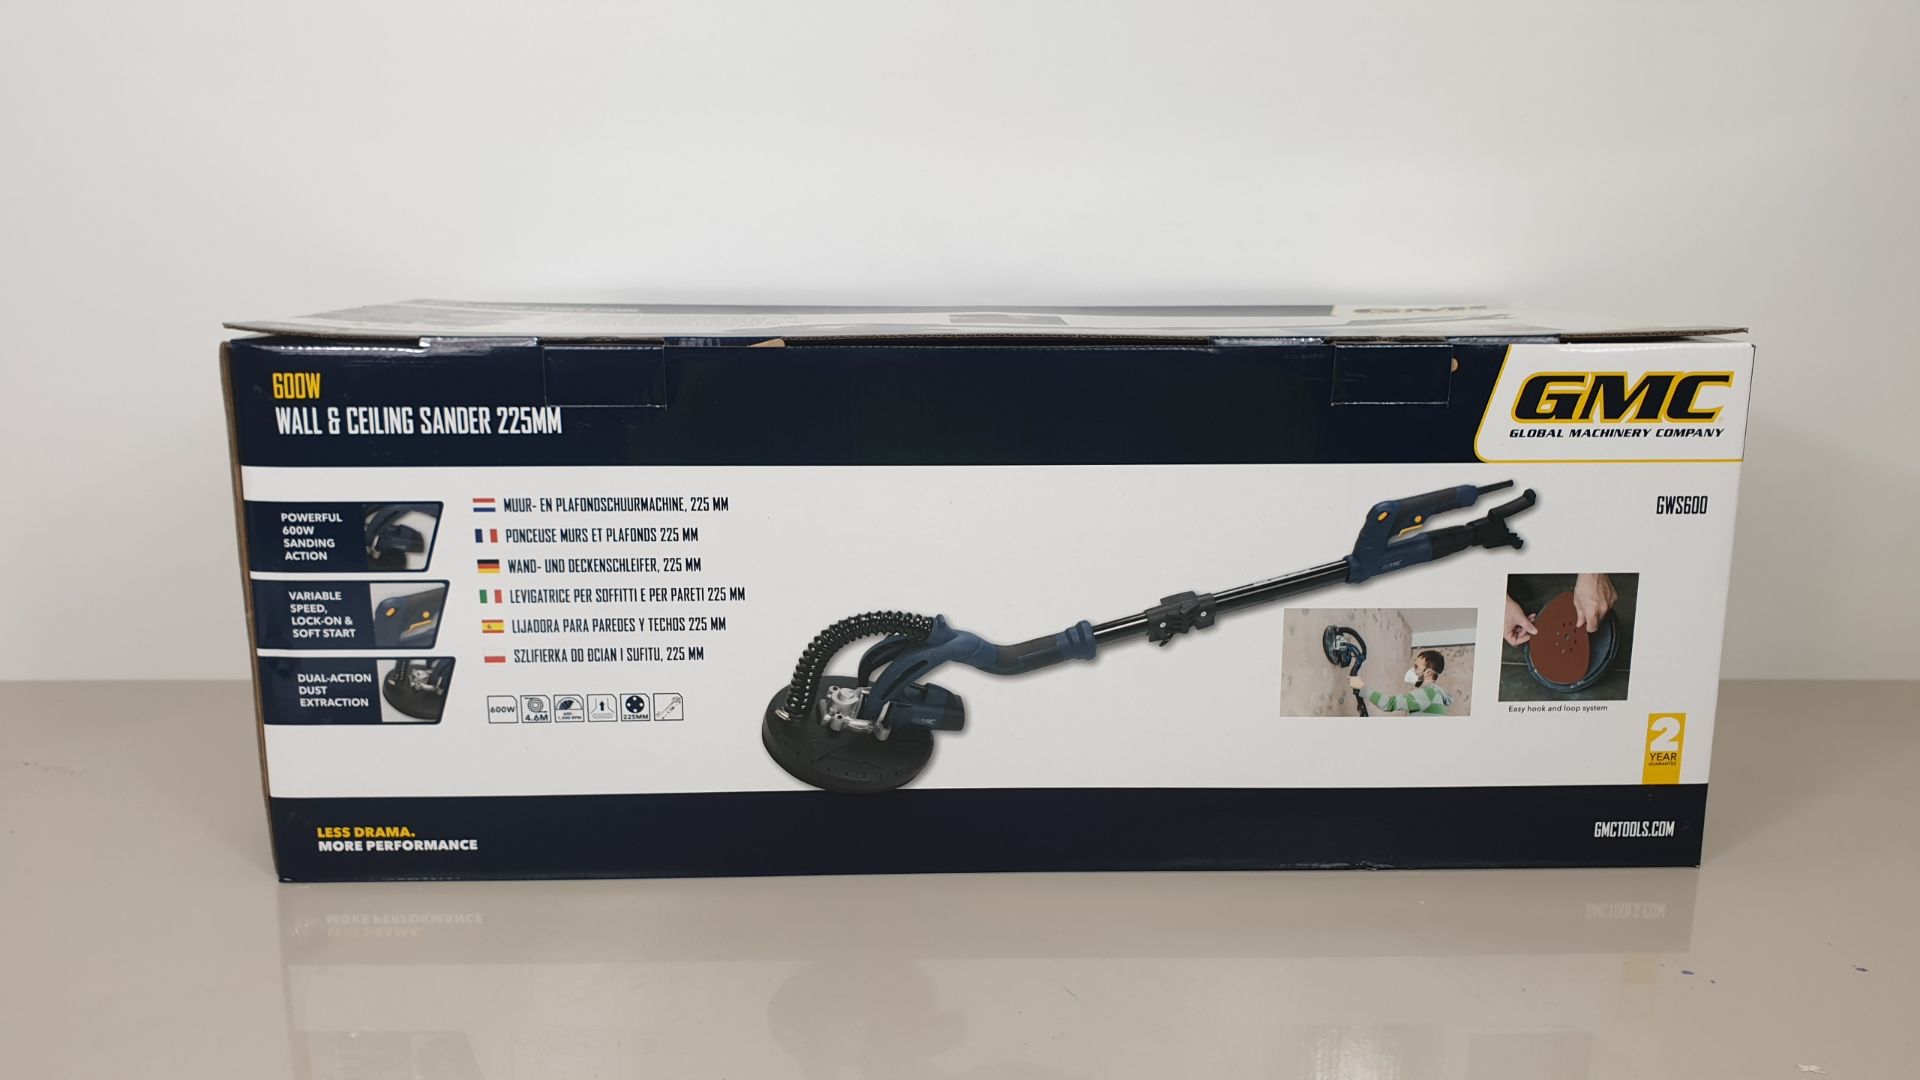 BRAND NEW GMC 600W WALL AND CEILING SANDER 225M